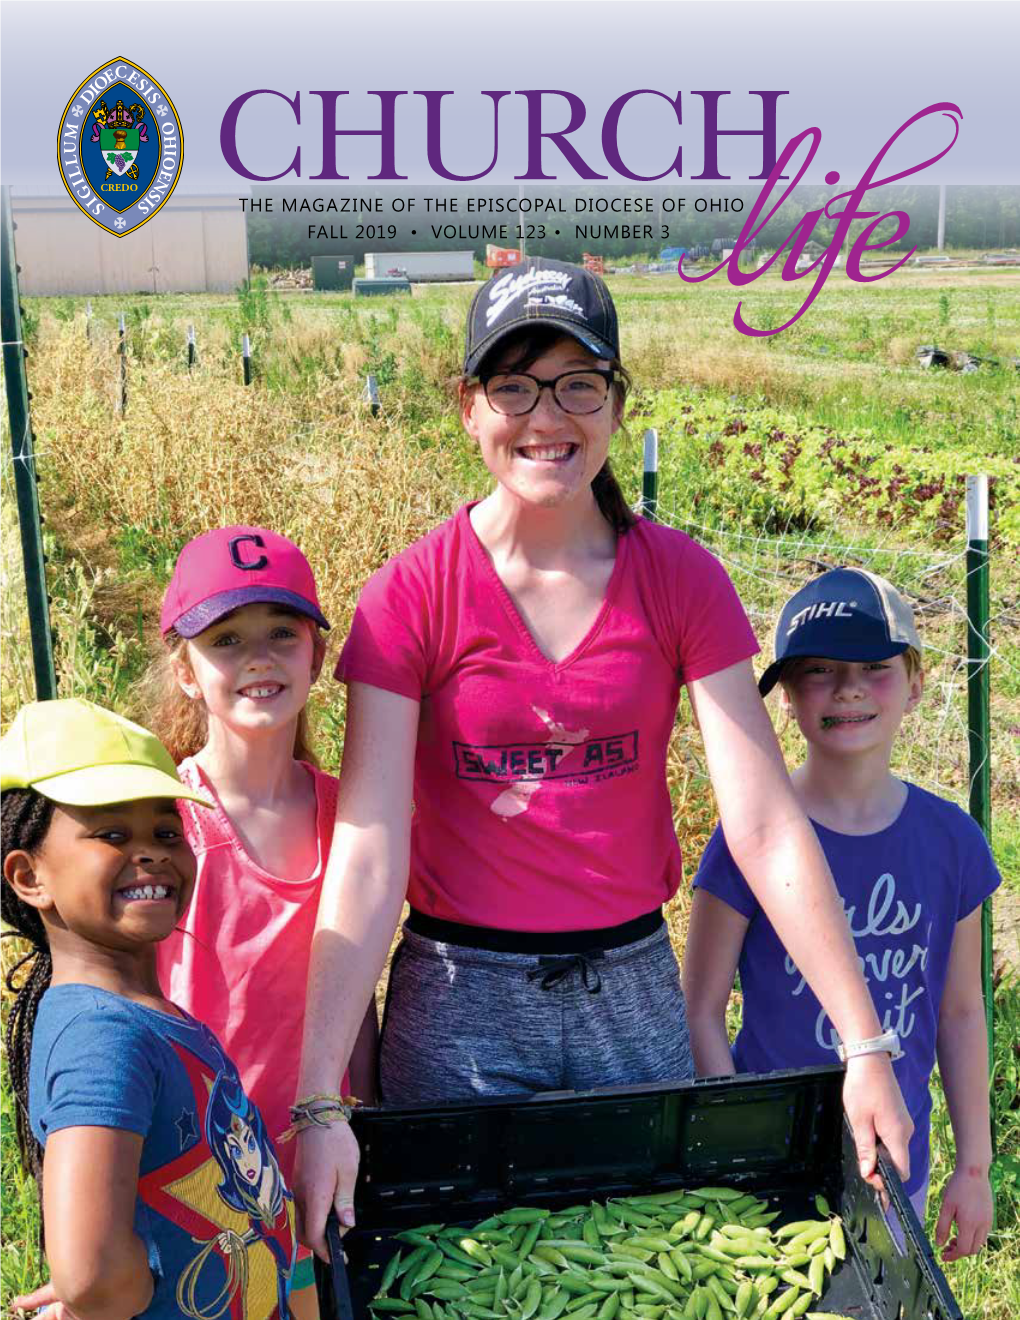 The Magazine of the Episcopal Diocese of Ohio Fall 2019 • Volume 123 • Number 3 the Episcopal Church